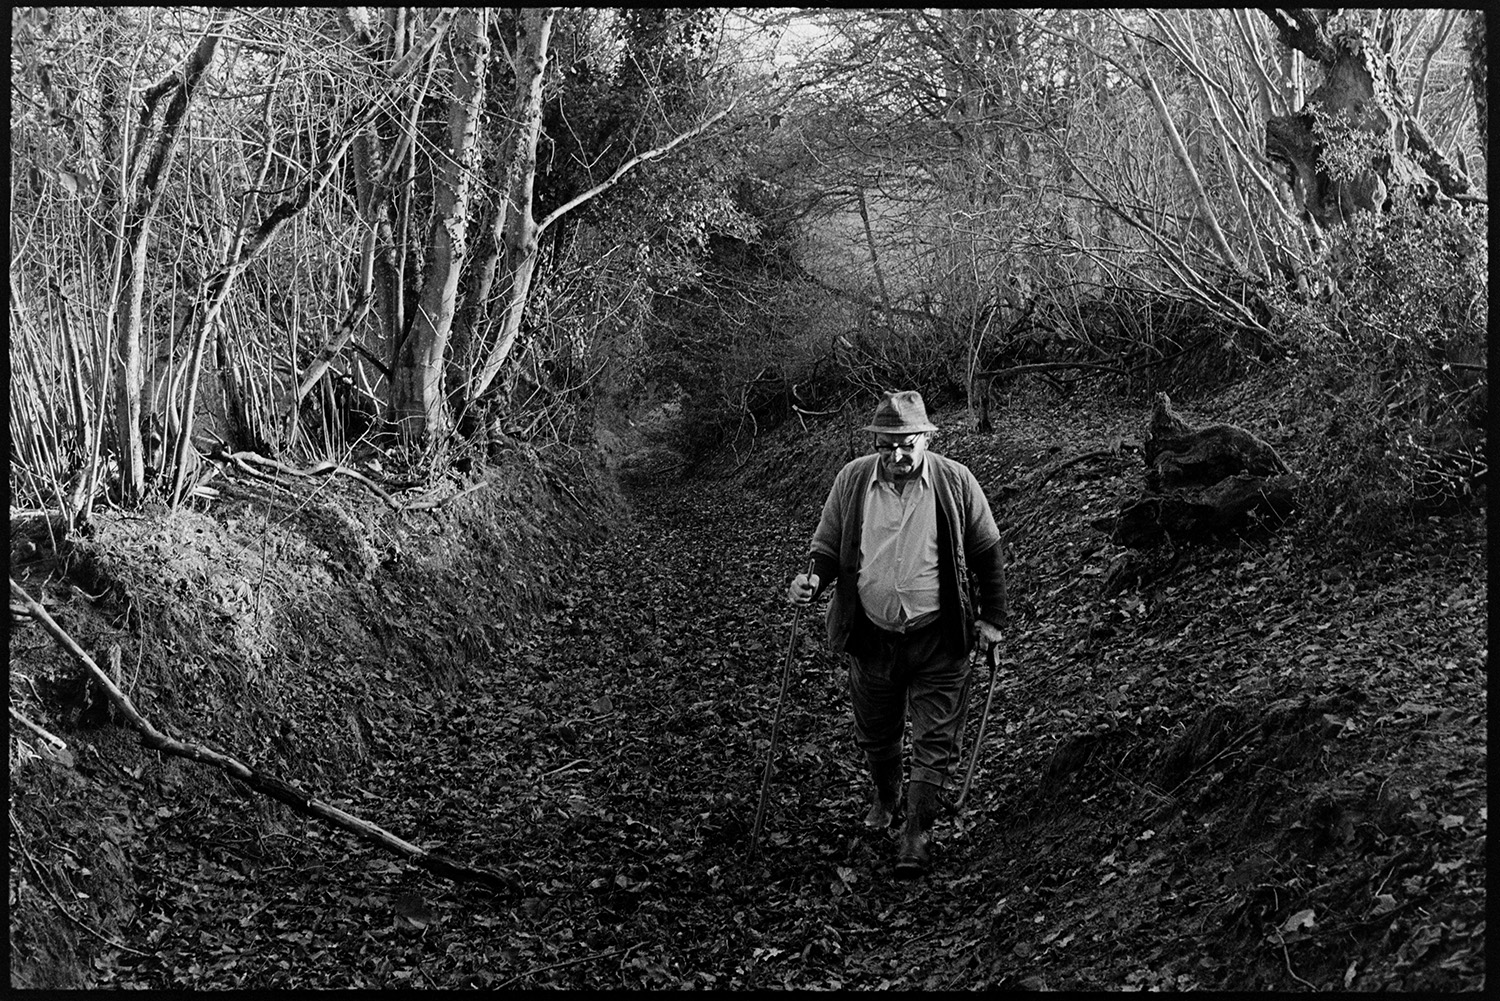 Farmer collecting holly for Christmas decorations, dogs. 
[Archie Parkhouse walking along a leaf covered and muddy lane at Langham, Dolton. Trees line the edges of the lane.]